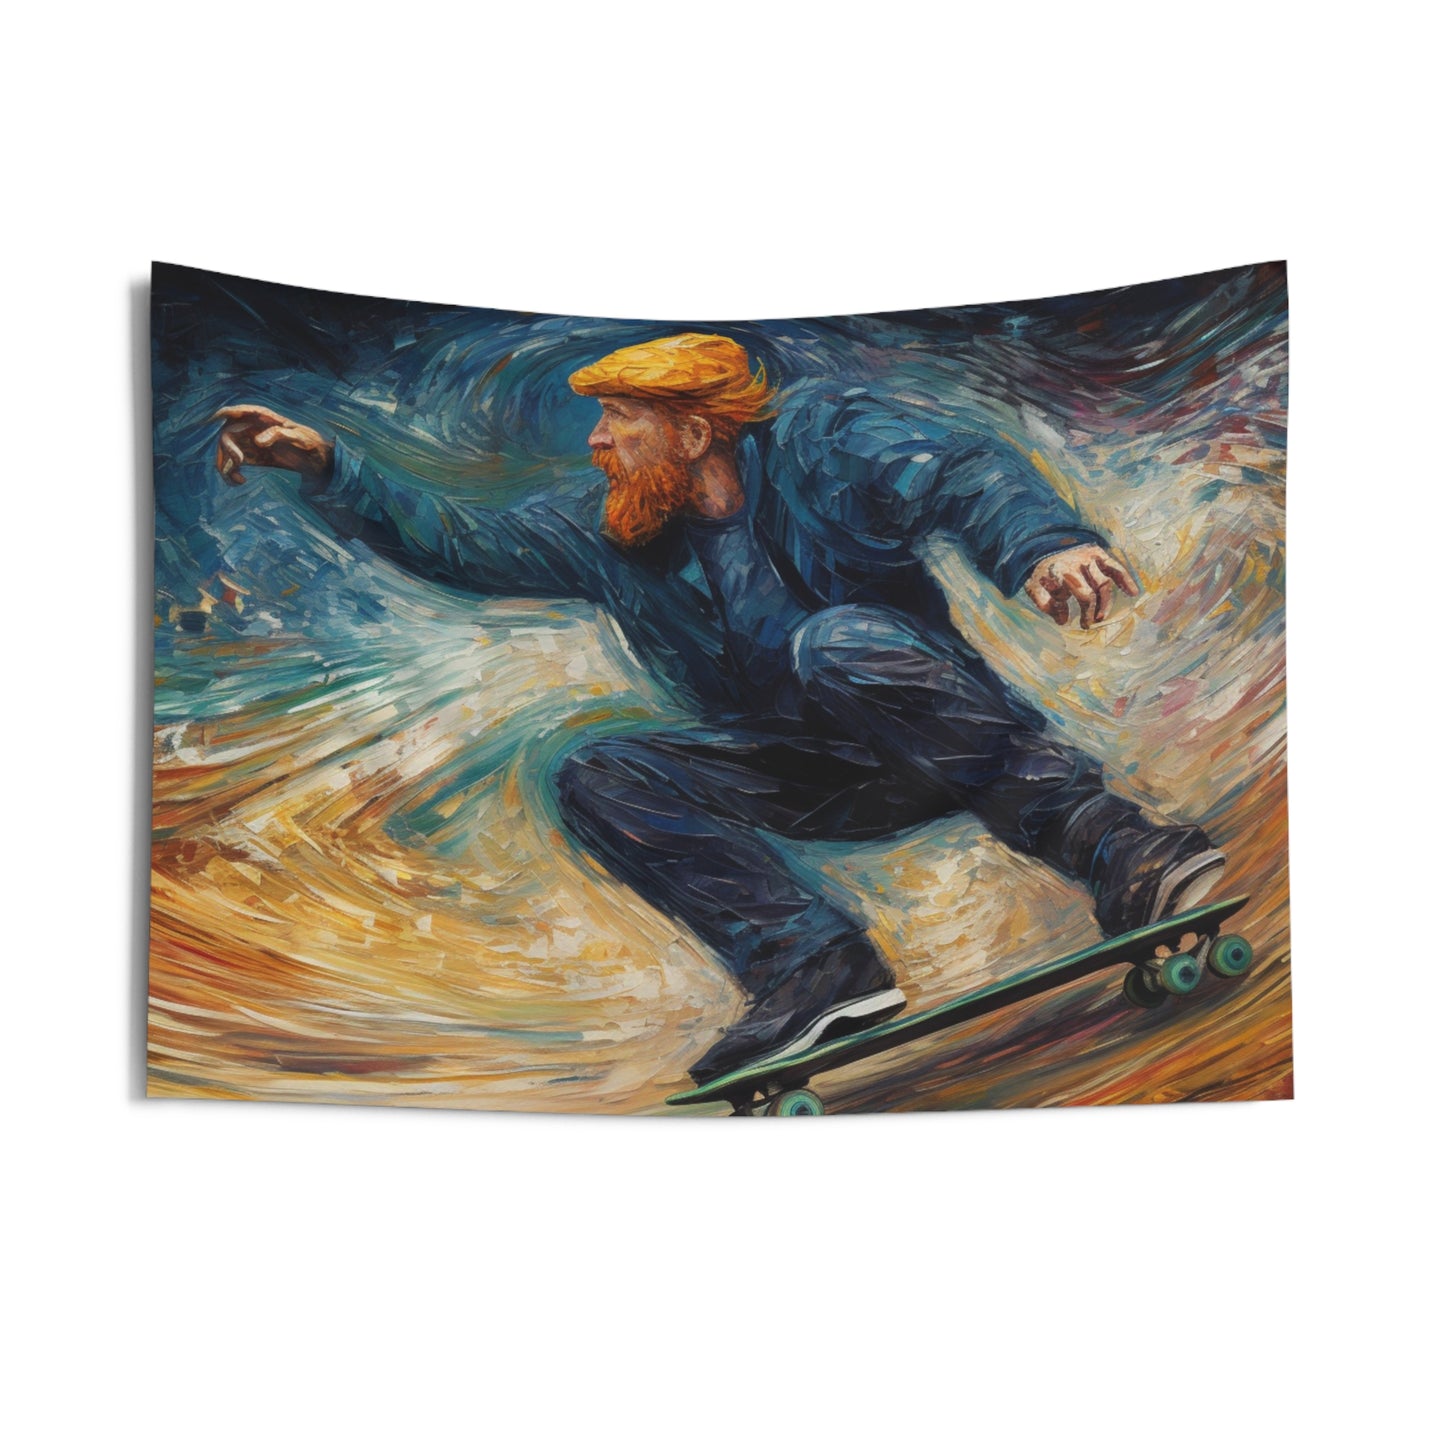 Skater Tapestry, Skateboard Skate Wall Art Hanging Cool Unique Landscape Aesthetic Large Small Decor Bedroom College Dorm Room Starcove Fashion